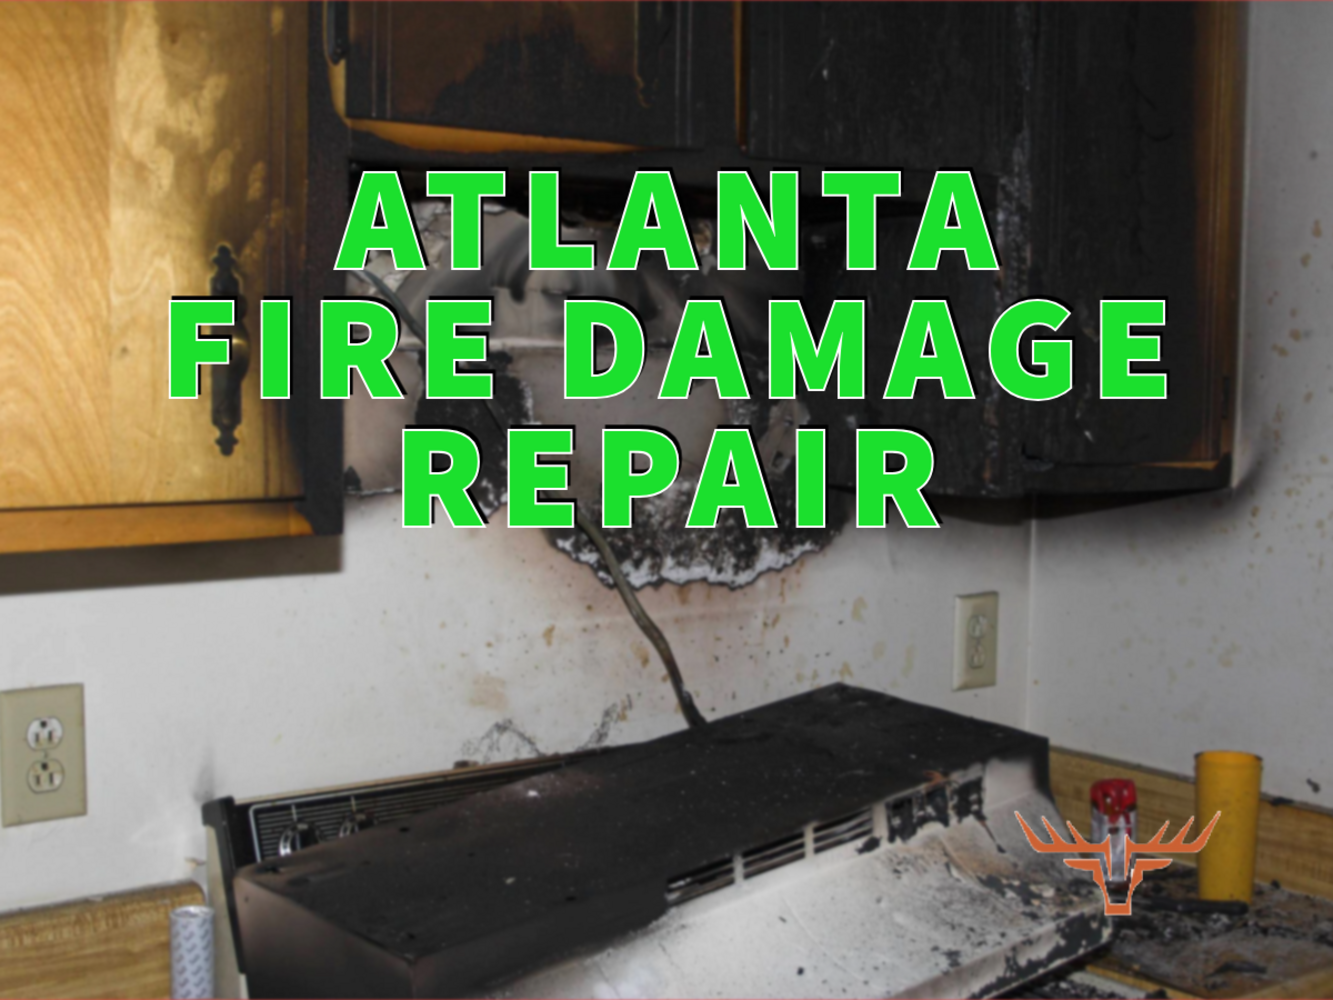 Atlanta fire damage repair written in green over fire-damaged stove